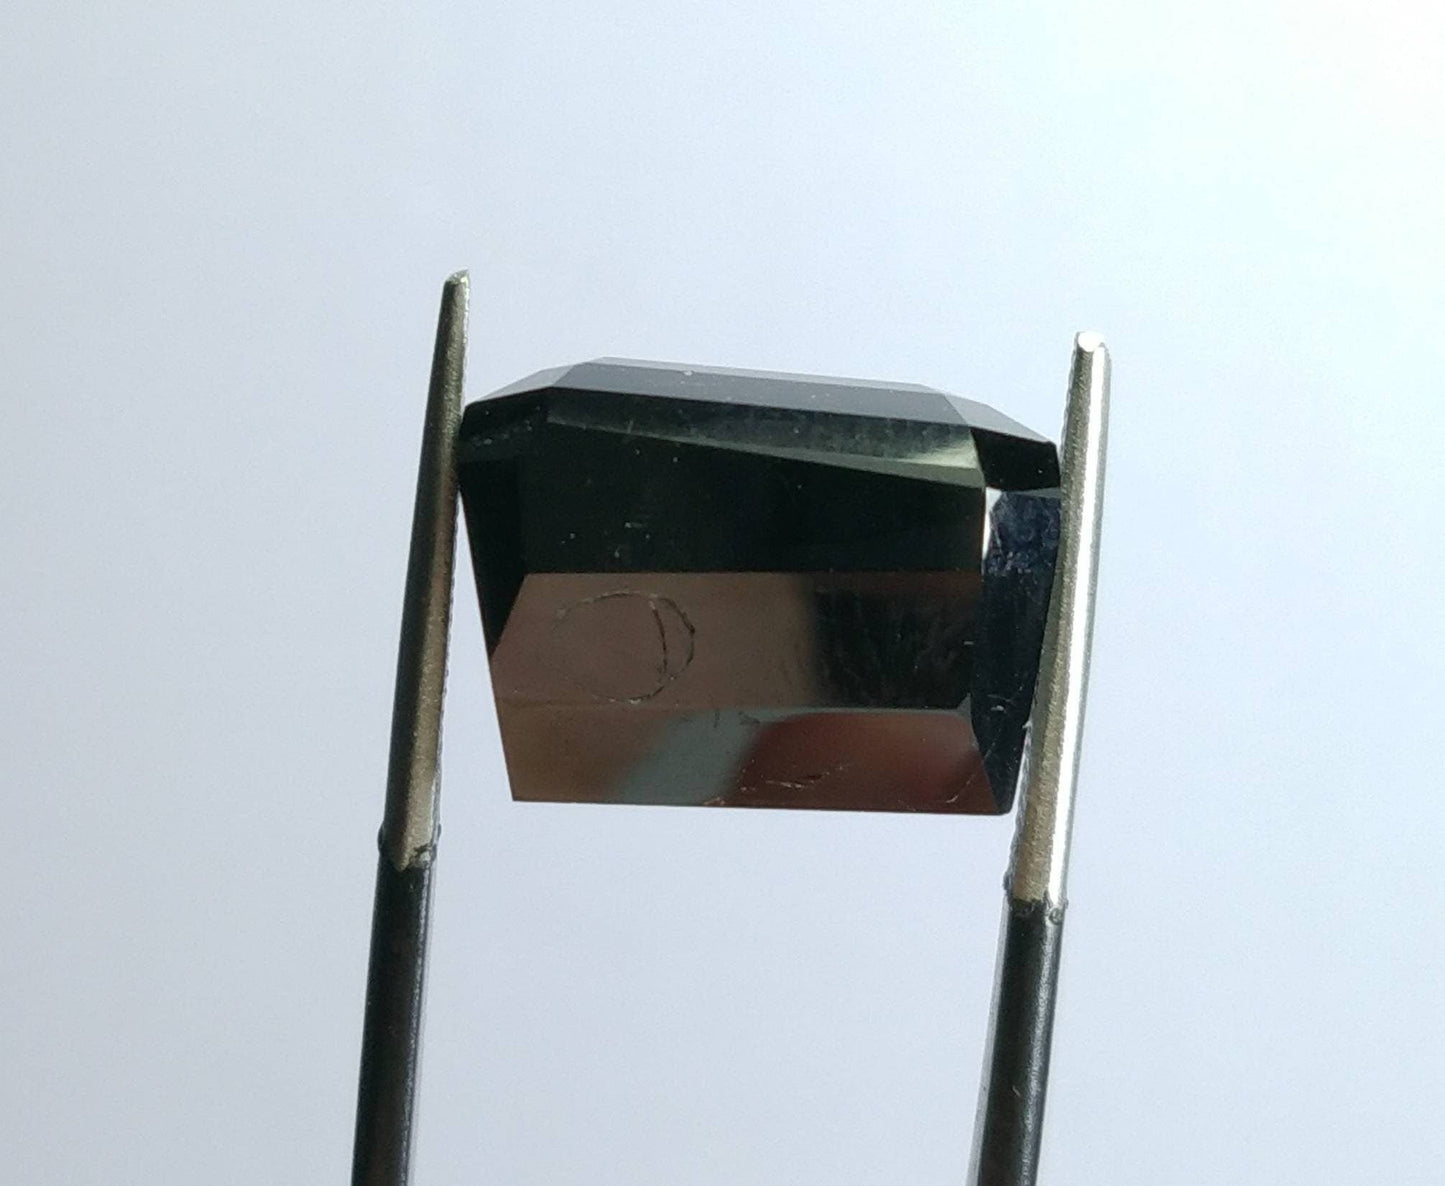 ARSAA GEMS AND MINERALSNatural top quality beautiful 22 carats radiant shape black tourmaline gem - Premium  from ARSAA GEMS AND MINERALS - Just $40.00! Shop now at ARSAA GEMS AND MINERALS